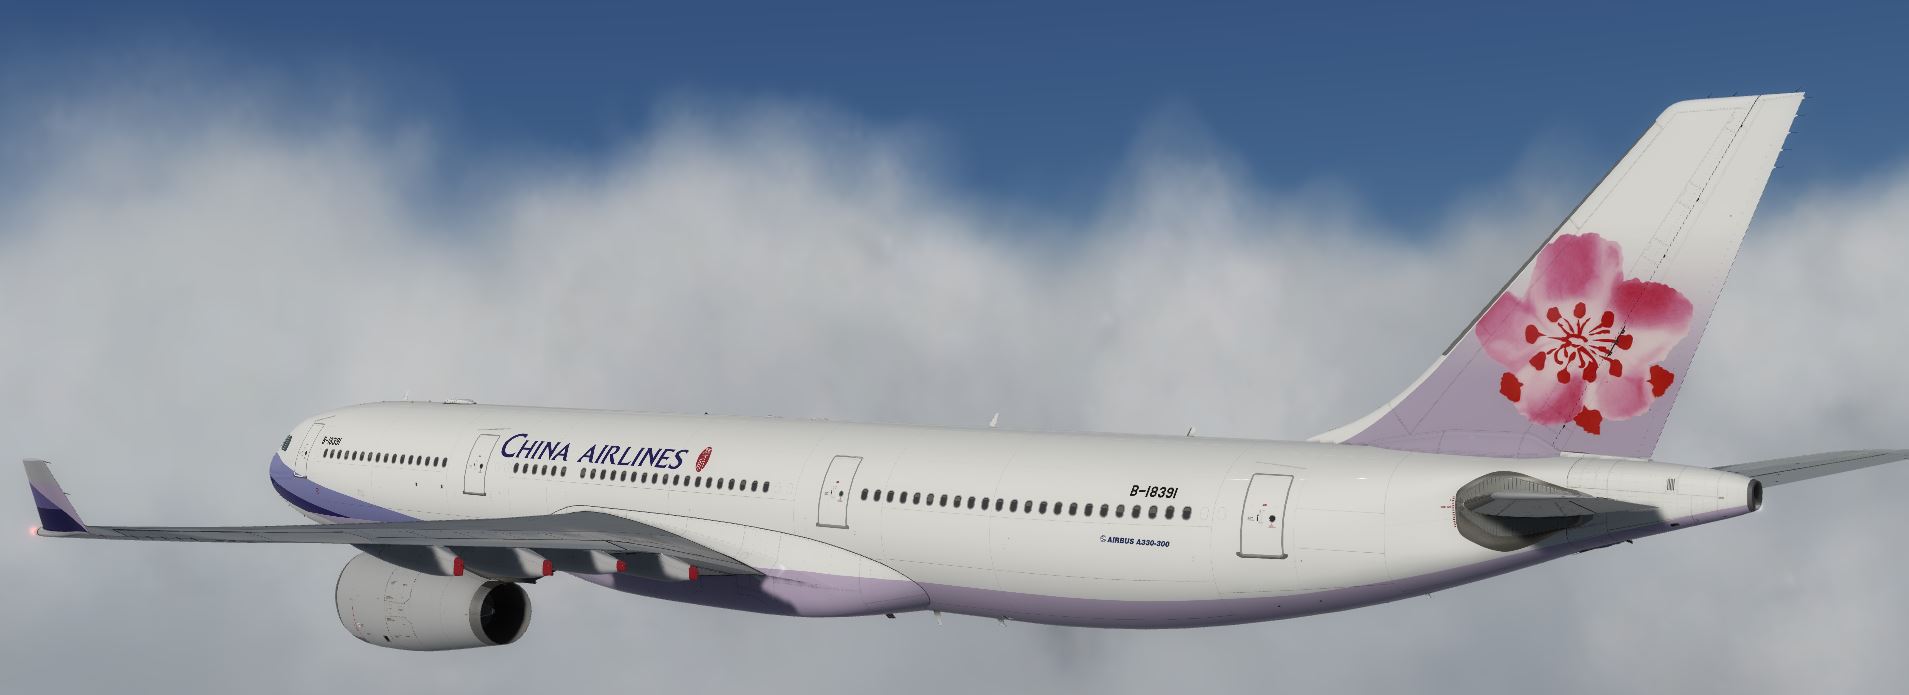 AS A330 ChinaAirline-3185 